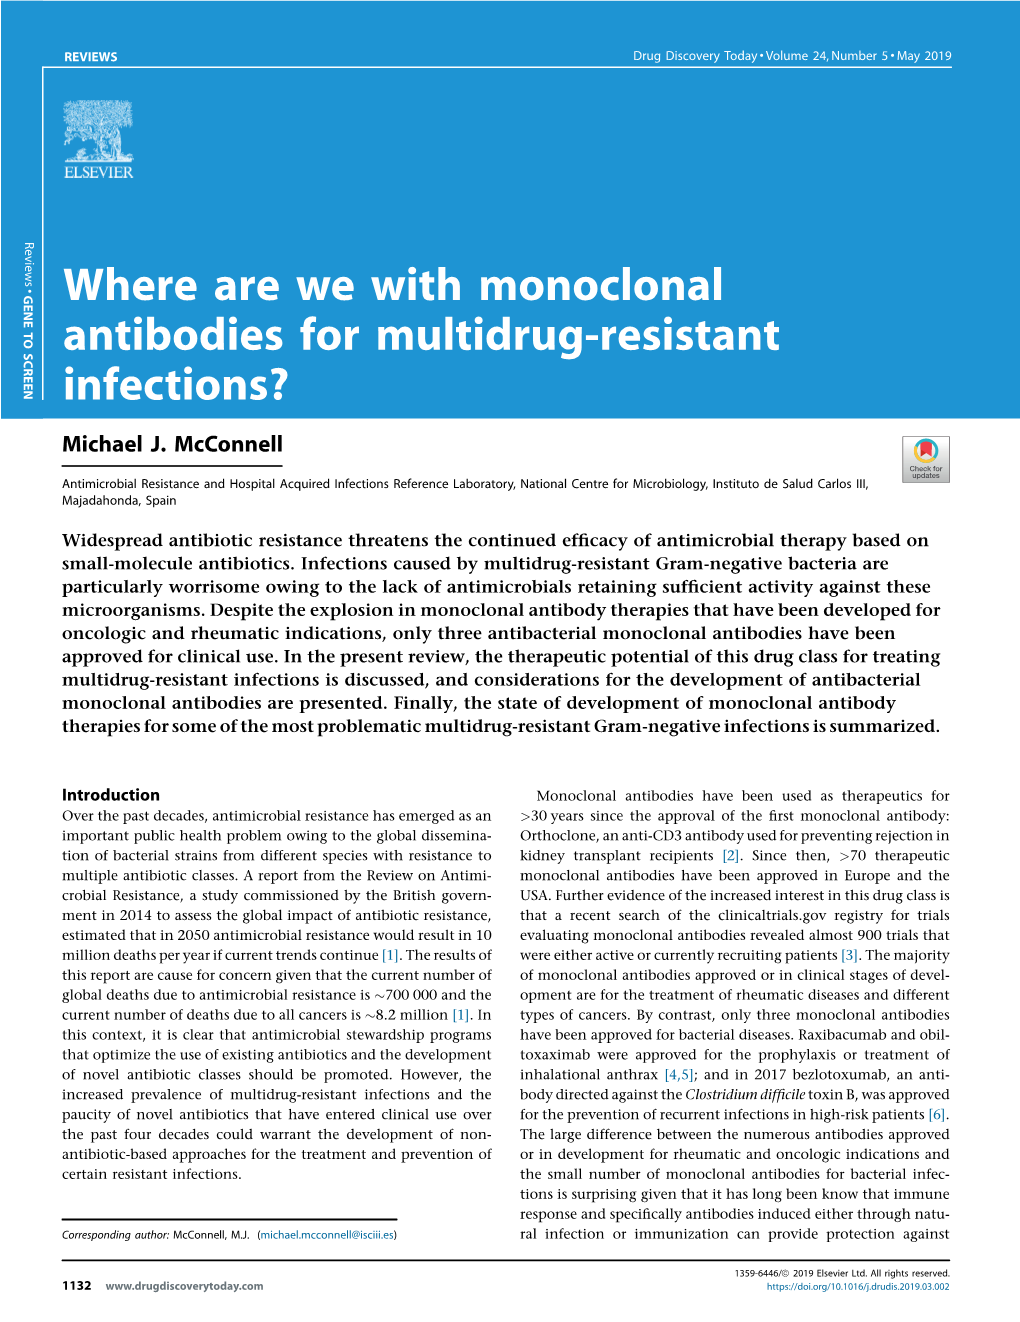 Where Are We with Monoclonal Antibodies for Multidrug-Resistant